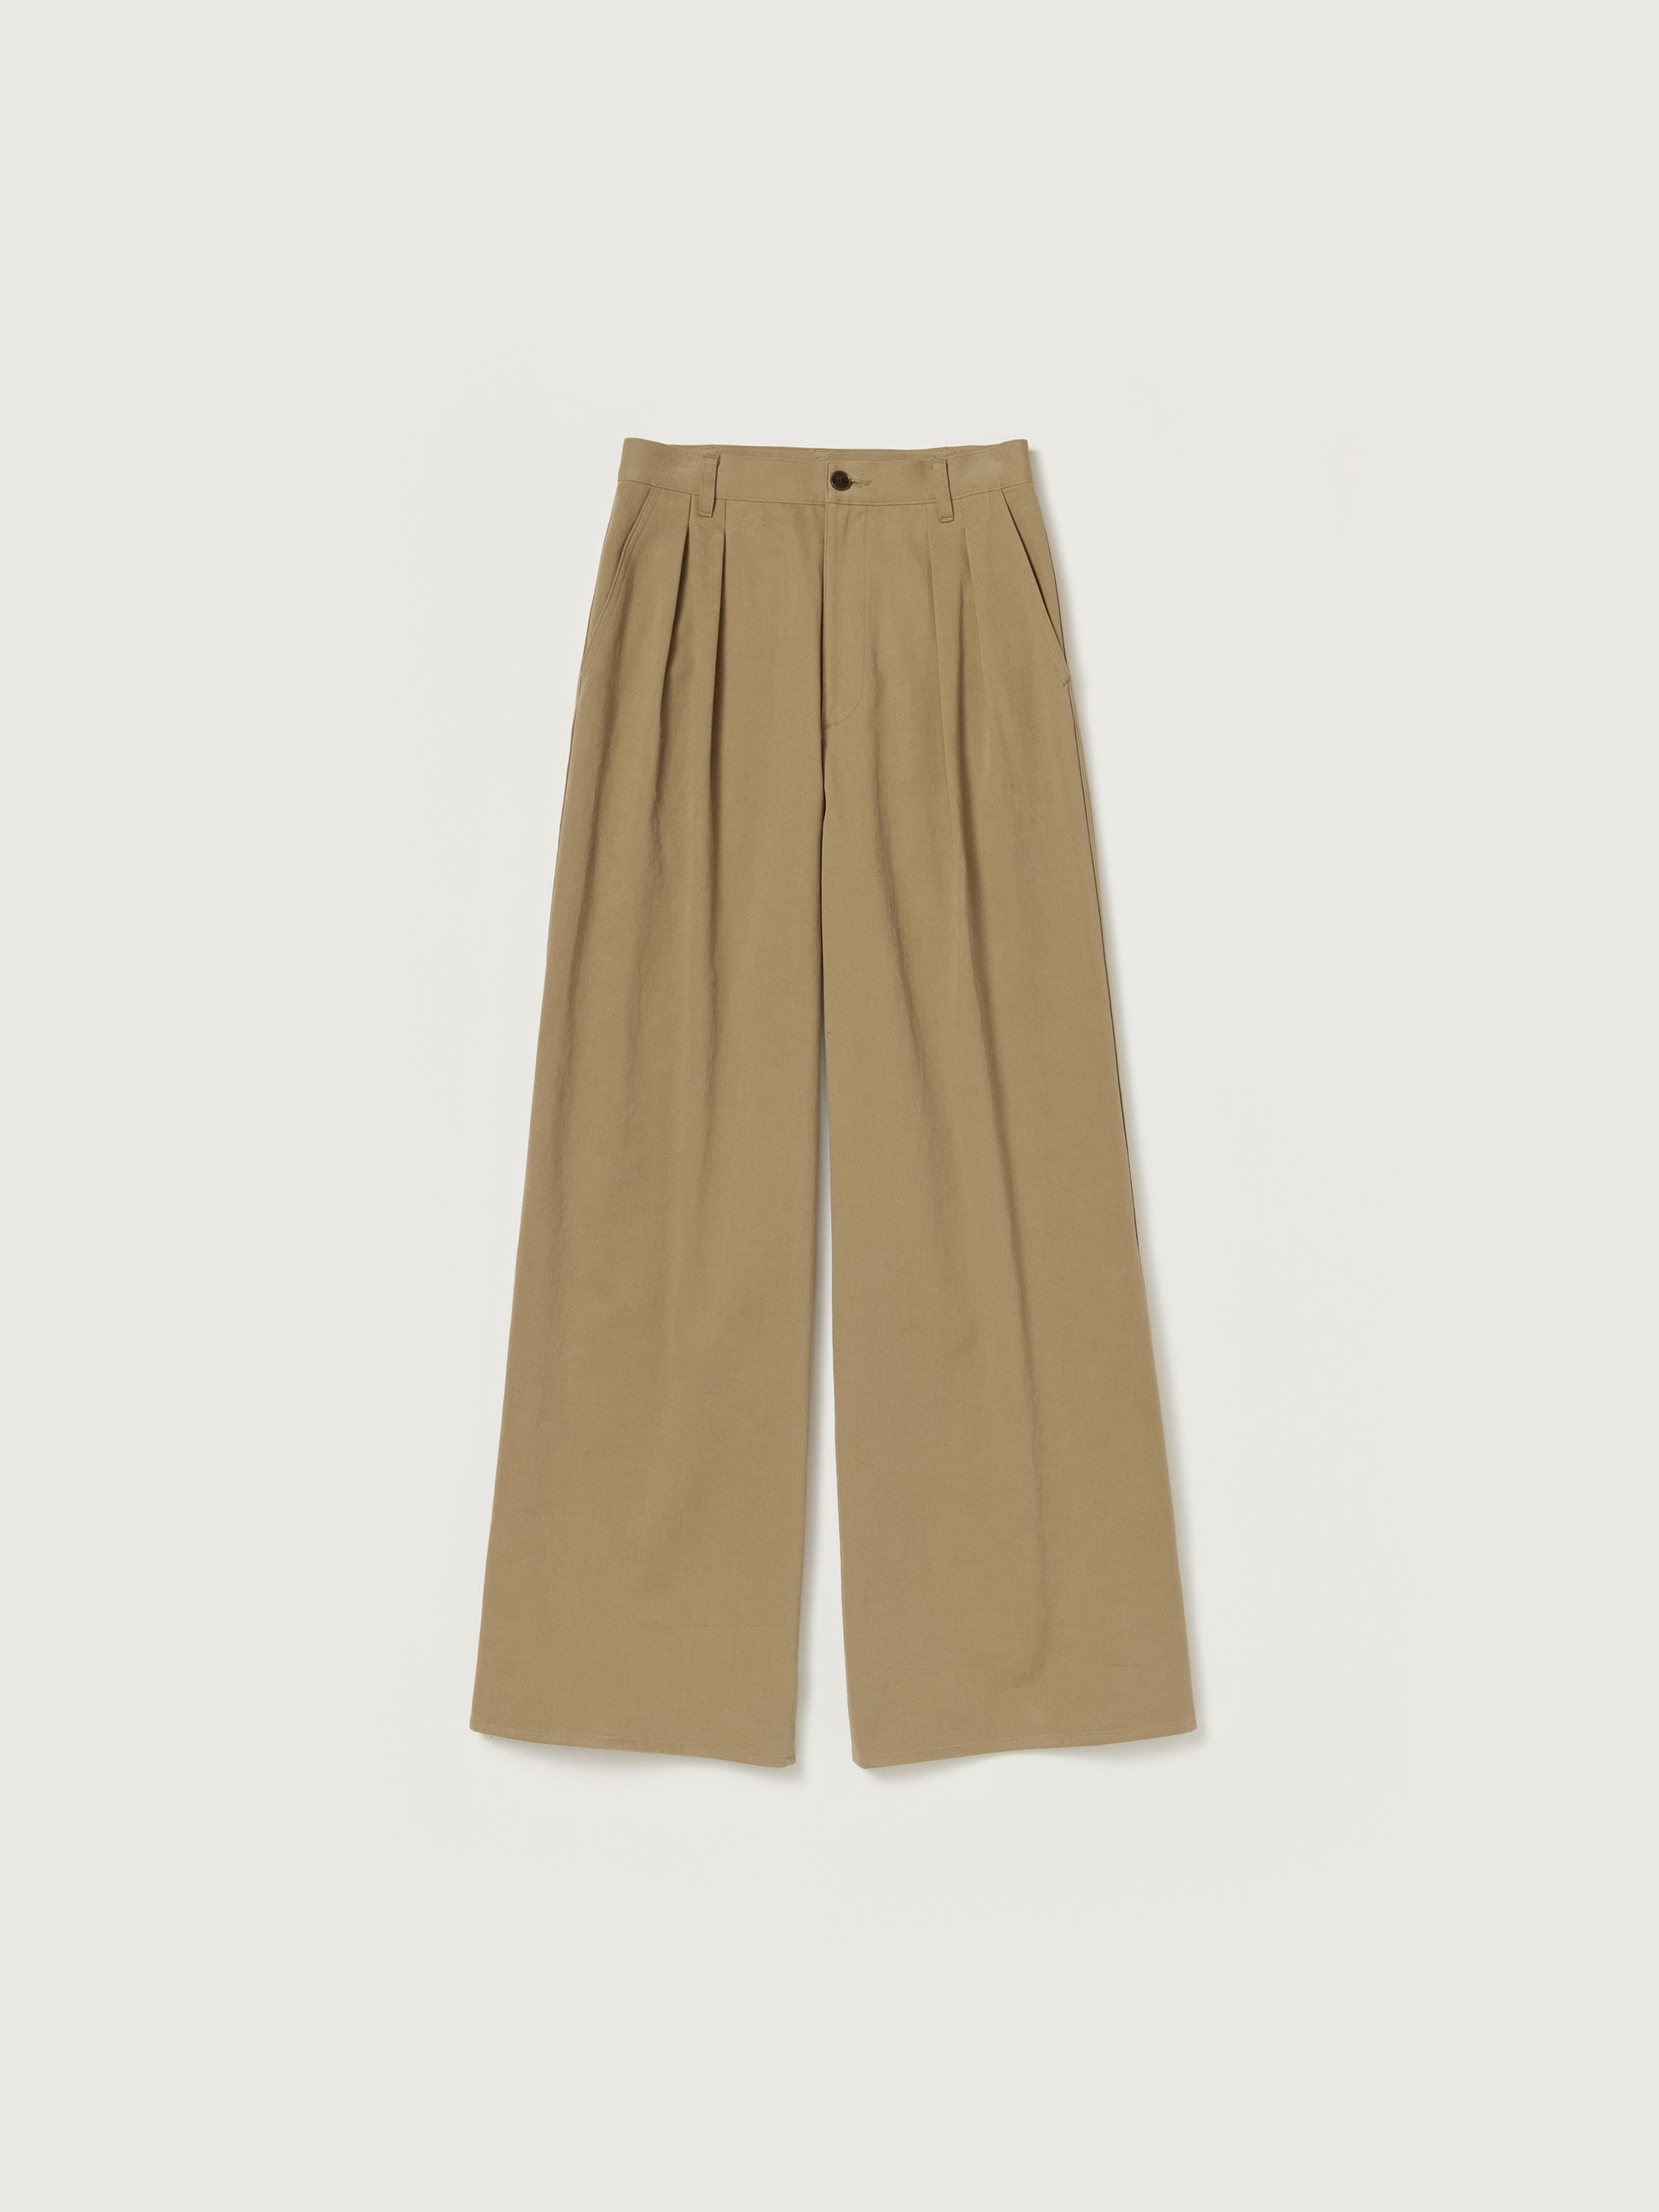 WASHED HEAVY CHINO WIDE PANTS 詳細画像 LIGHT BROWN 1